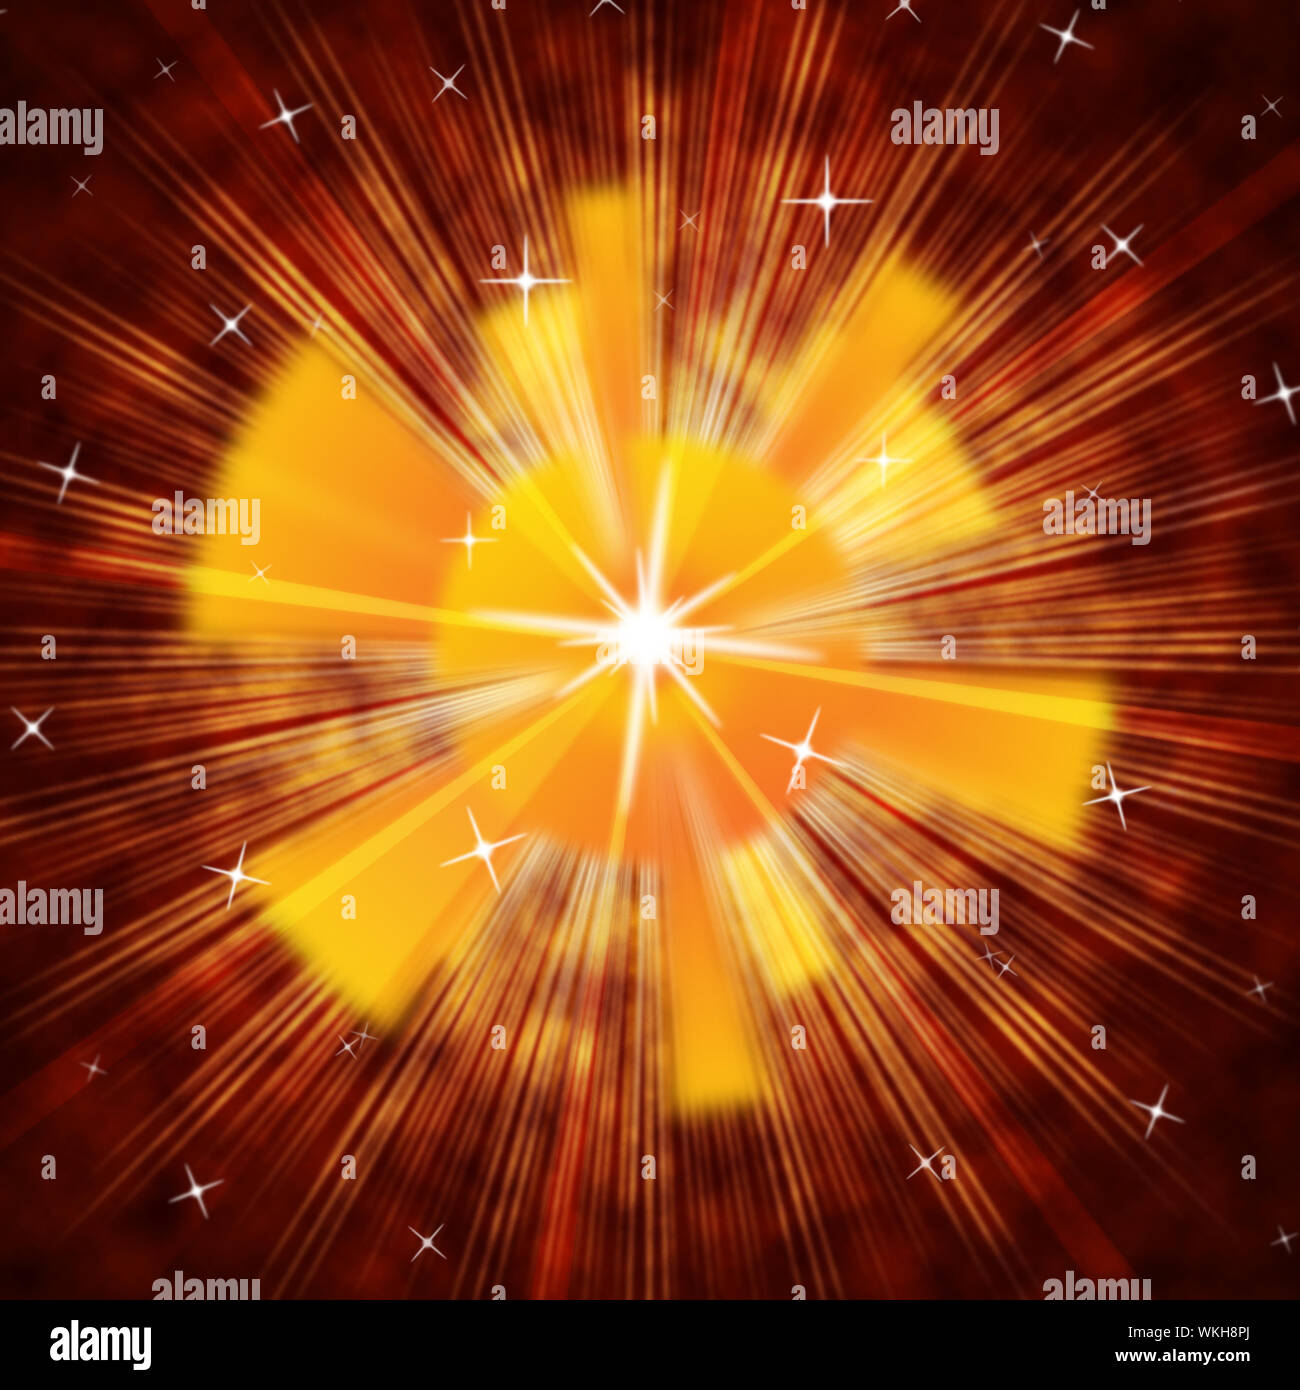 Brown Sun Background Meaning Radiating Light And Stars Stock Photo - Alamy